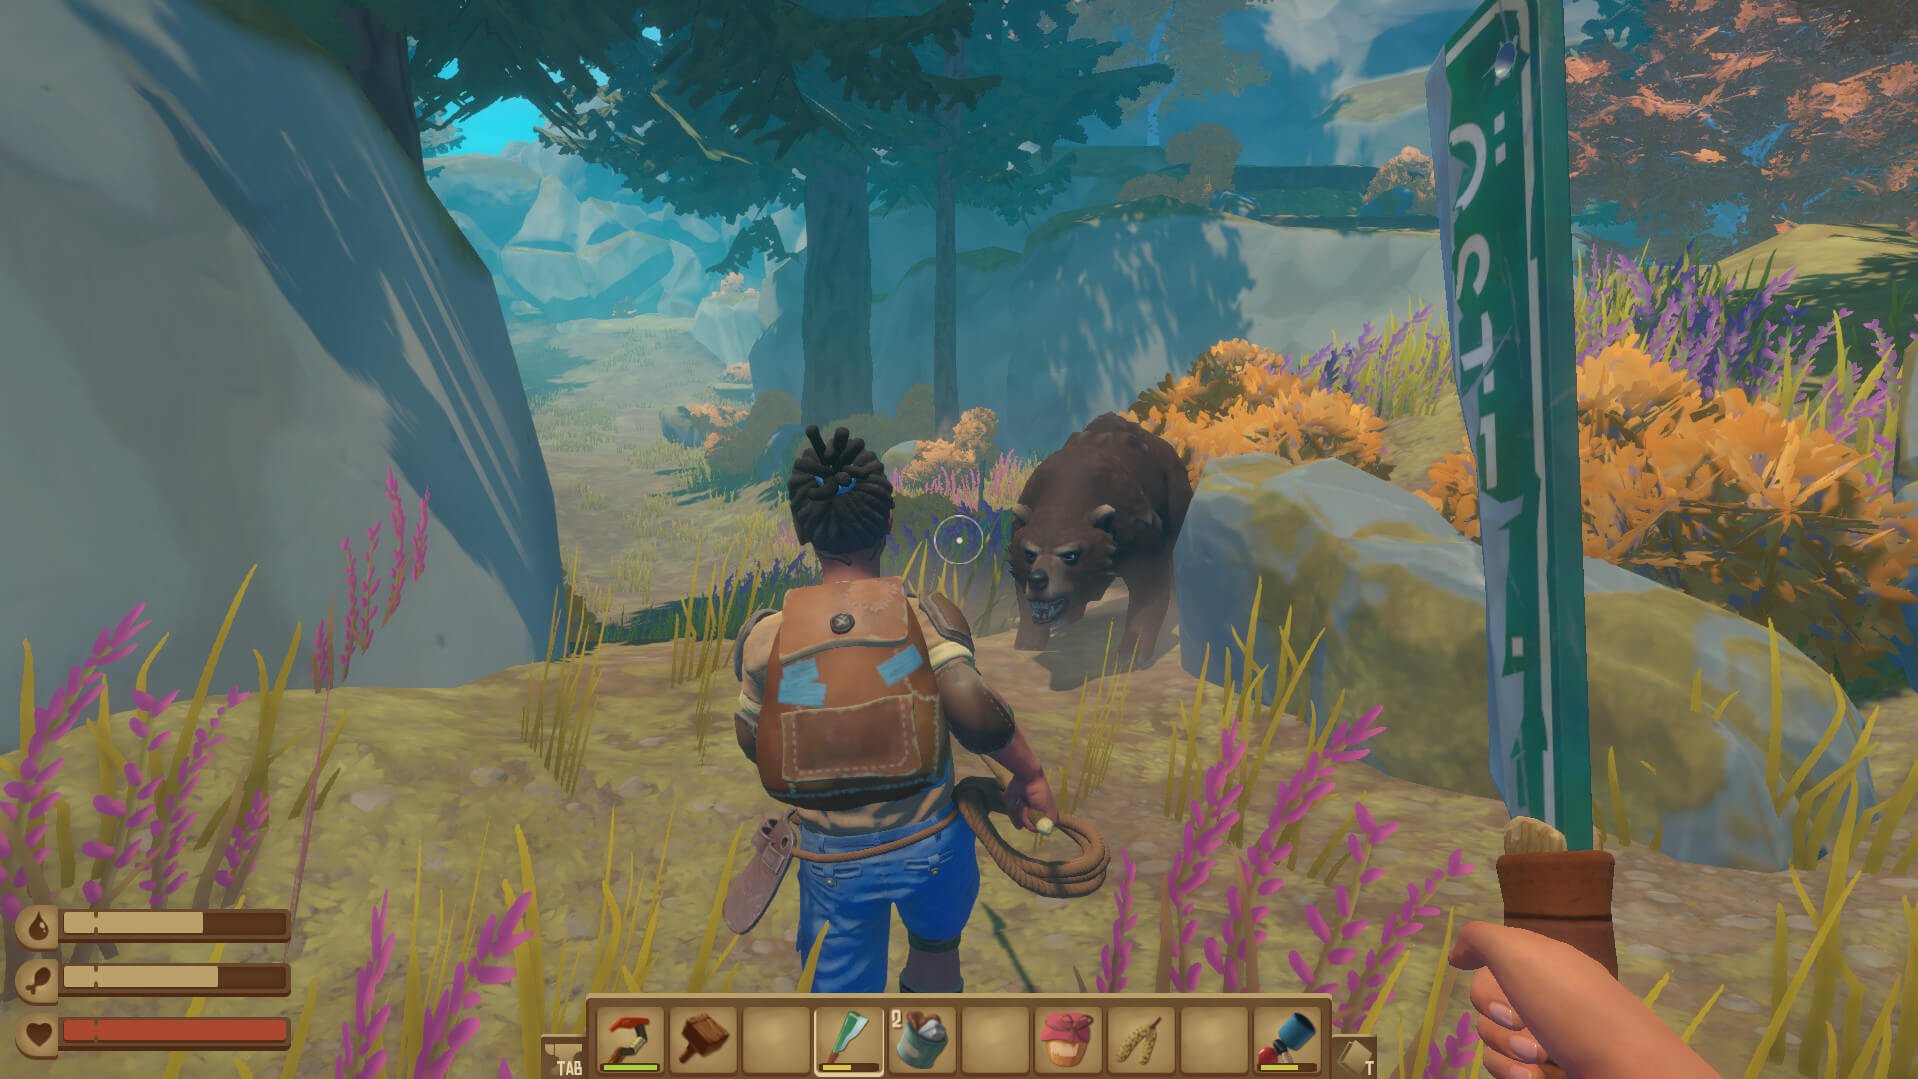 Players facing off against a bear in Raft